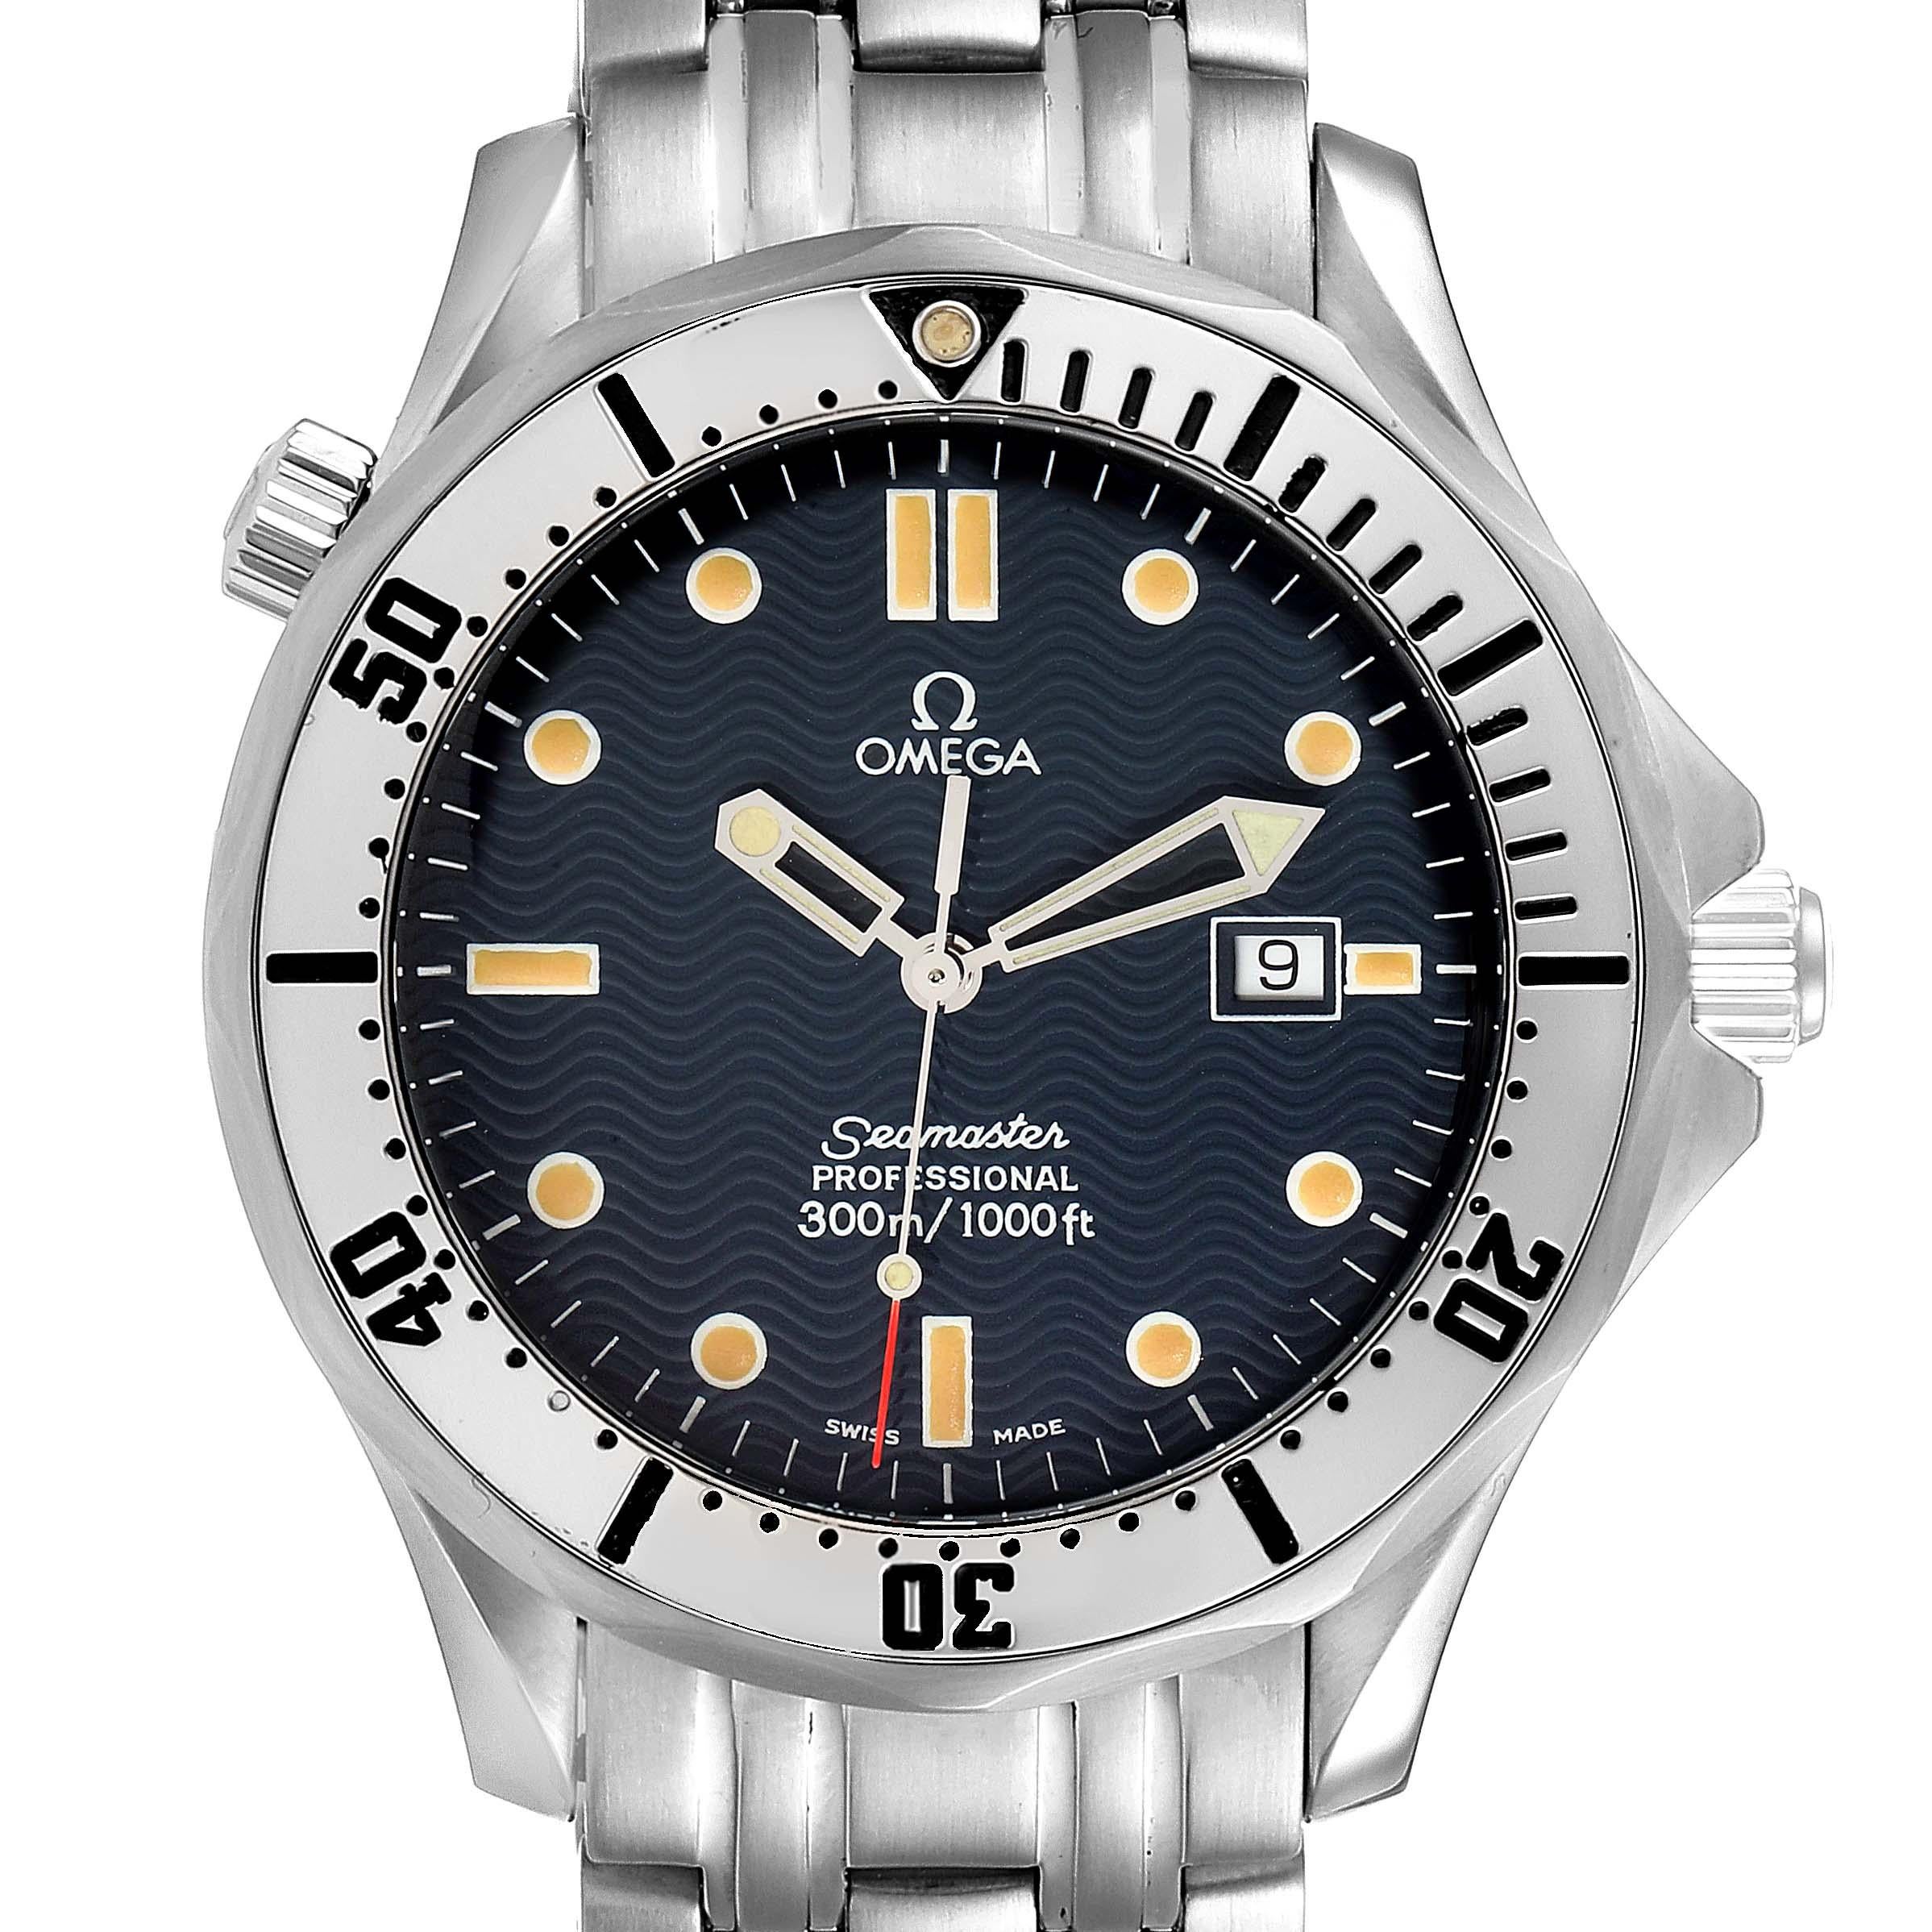 Omega Seamaster 300m Blue Wave Dial 41mm Mens Watch 2542.80.00 Card. Quartz precision movement with rhodium-plated finish. Caliber 1538. Stainless steel case 41.0 mm in diameter. Omega logo on a crown. Stainless steel unidirectional rotating bezel.